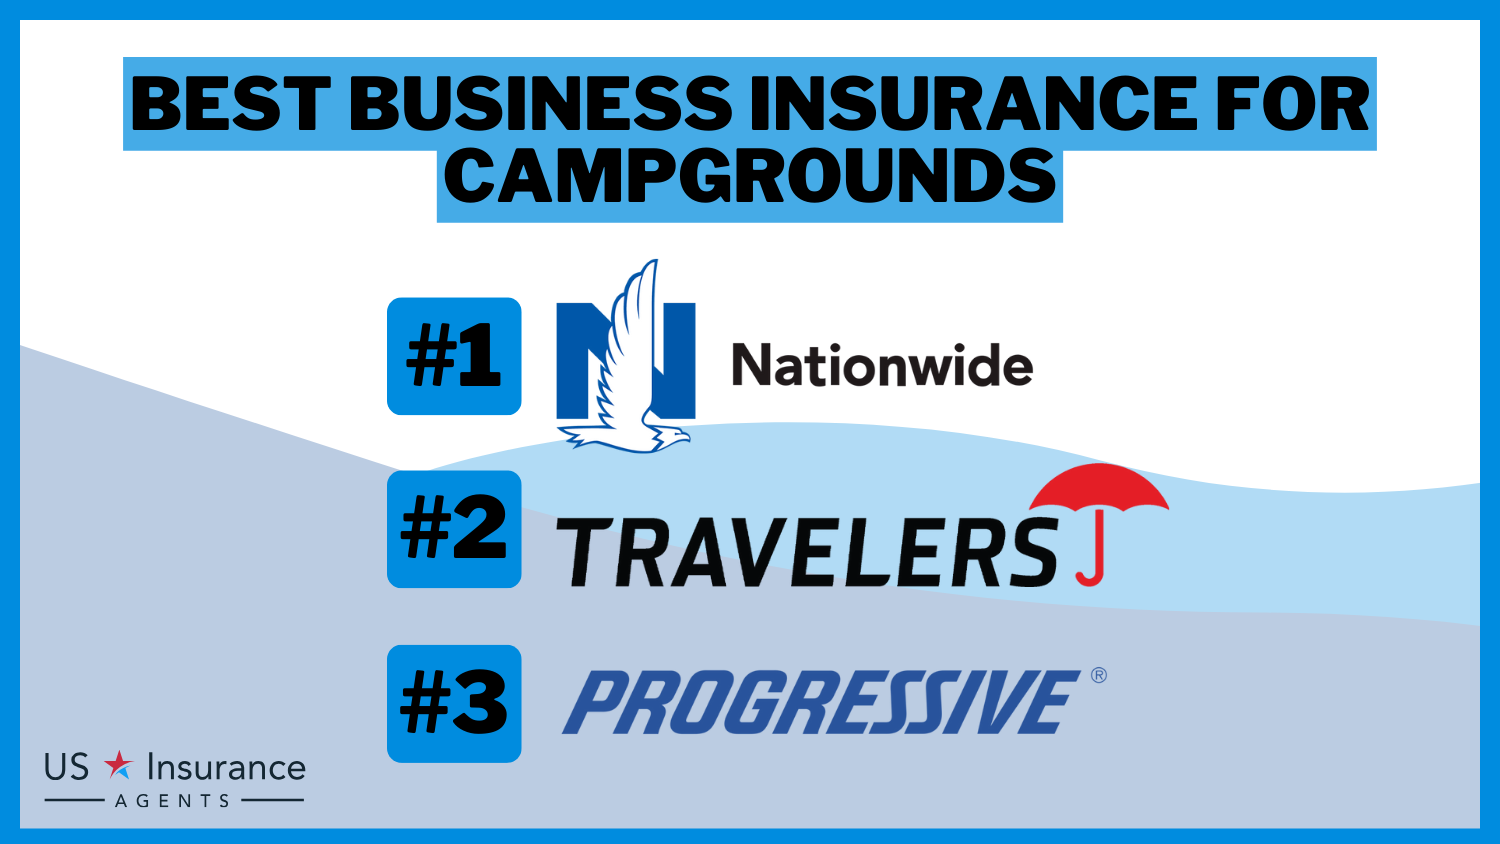 Nationwide, Travelers and Progressive: Best Business Insurance for Campgrounds